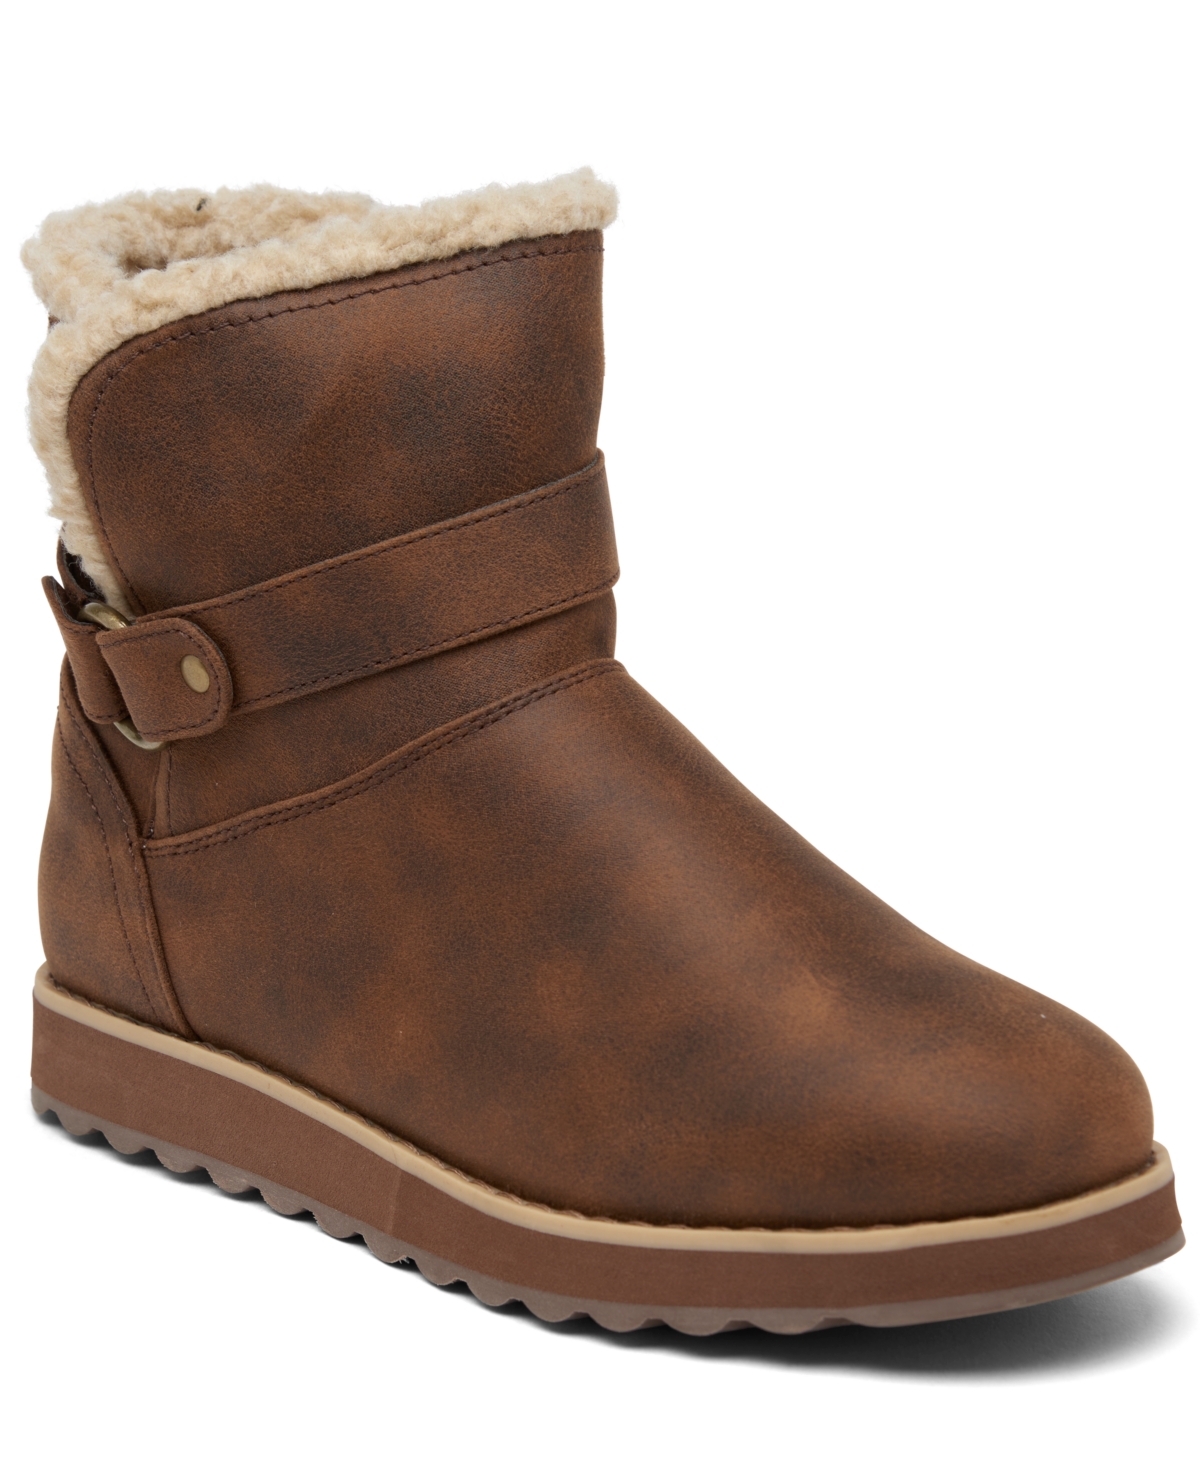 Skechers Keepsakes 2.0 - Home Sweet Home Boots From Finish Line In Chocolate | ModeSens